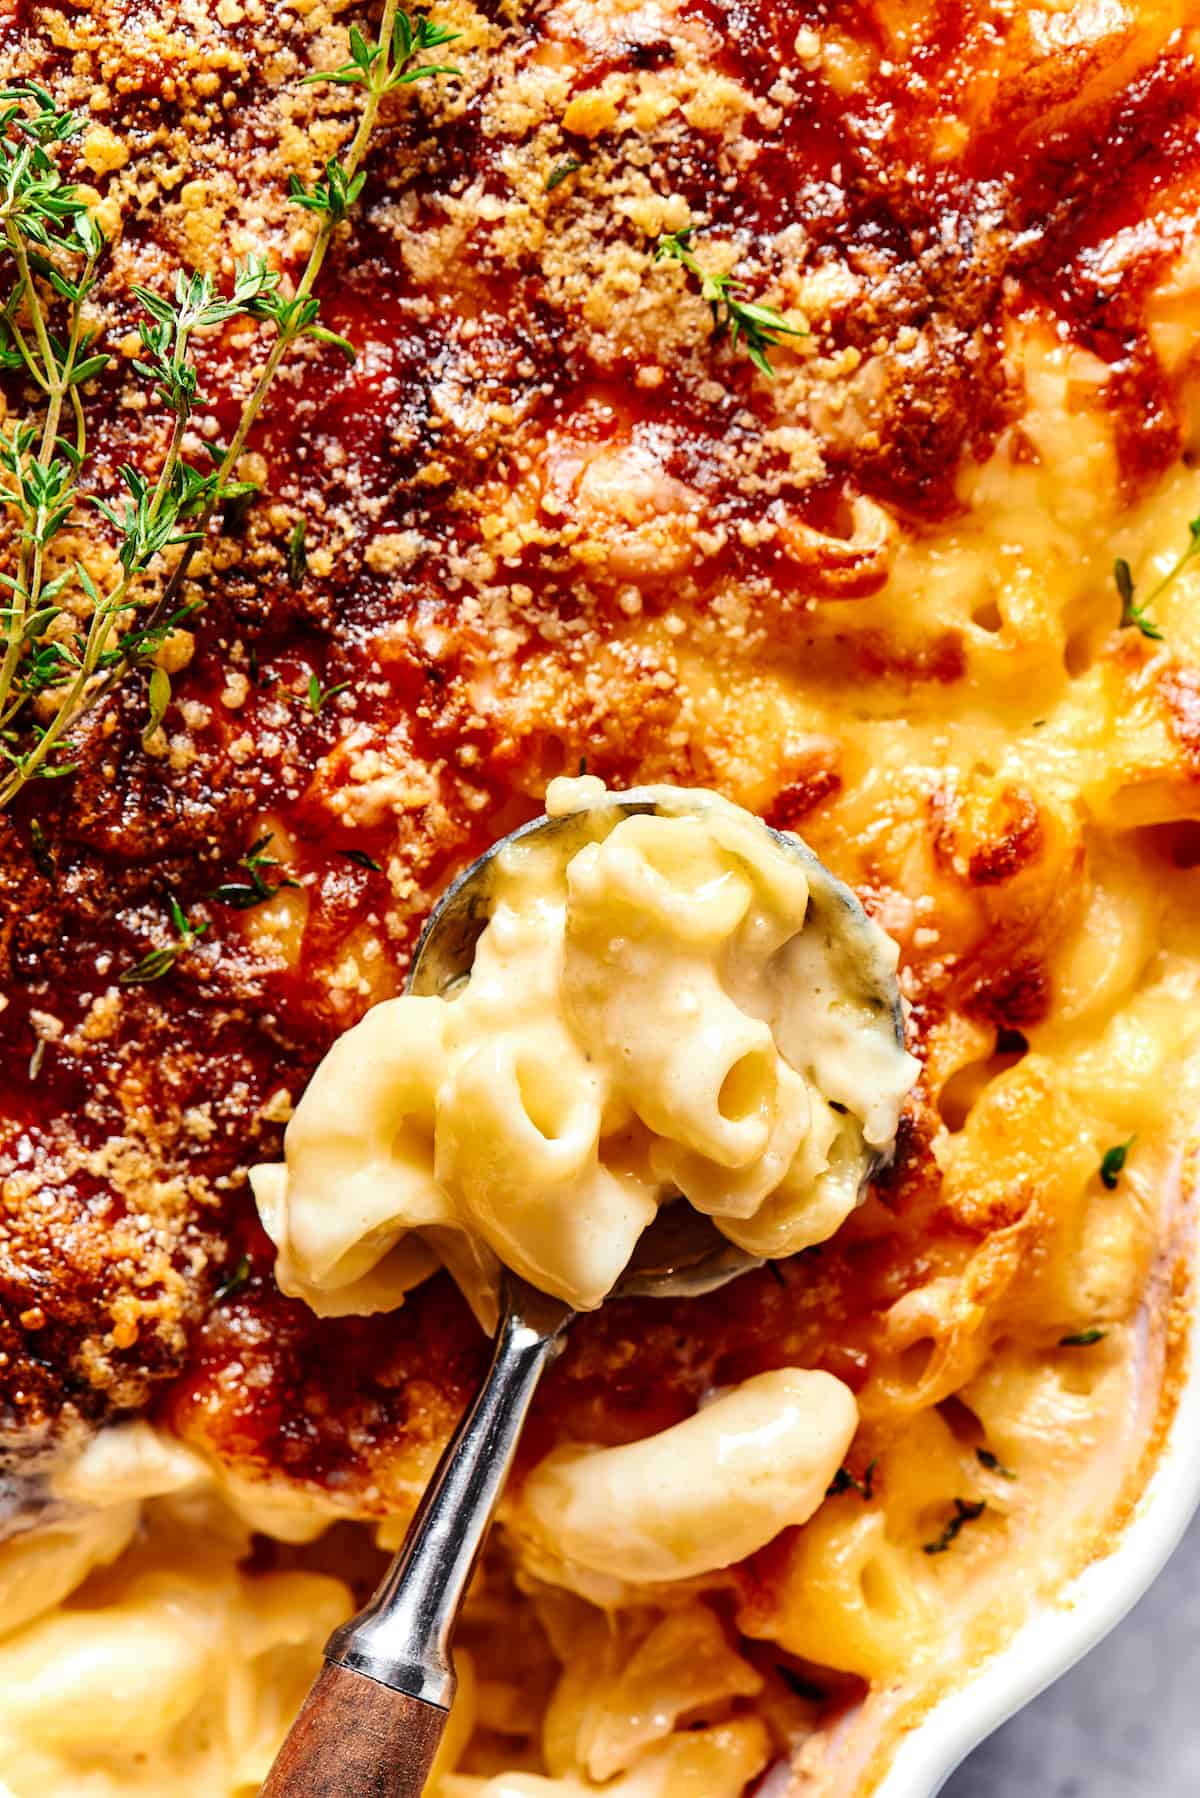 Spooning baked macaroni out of a casserole dish.